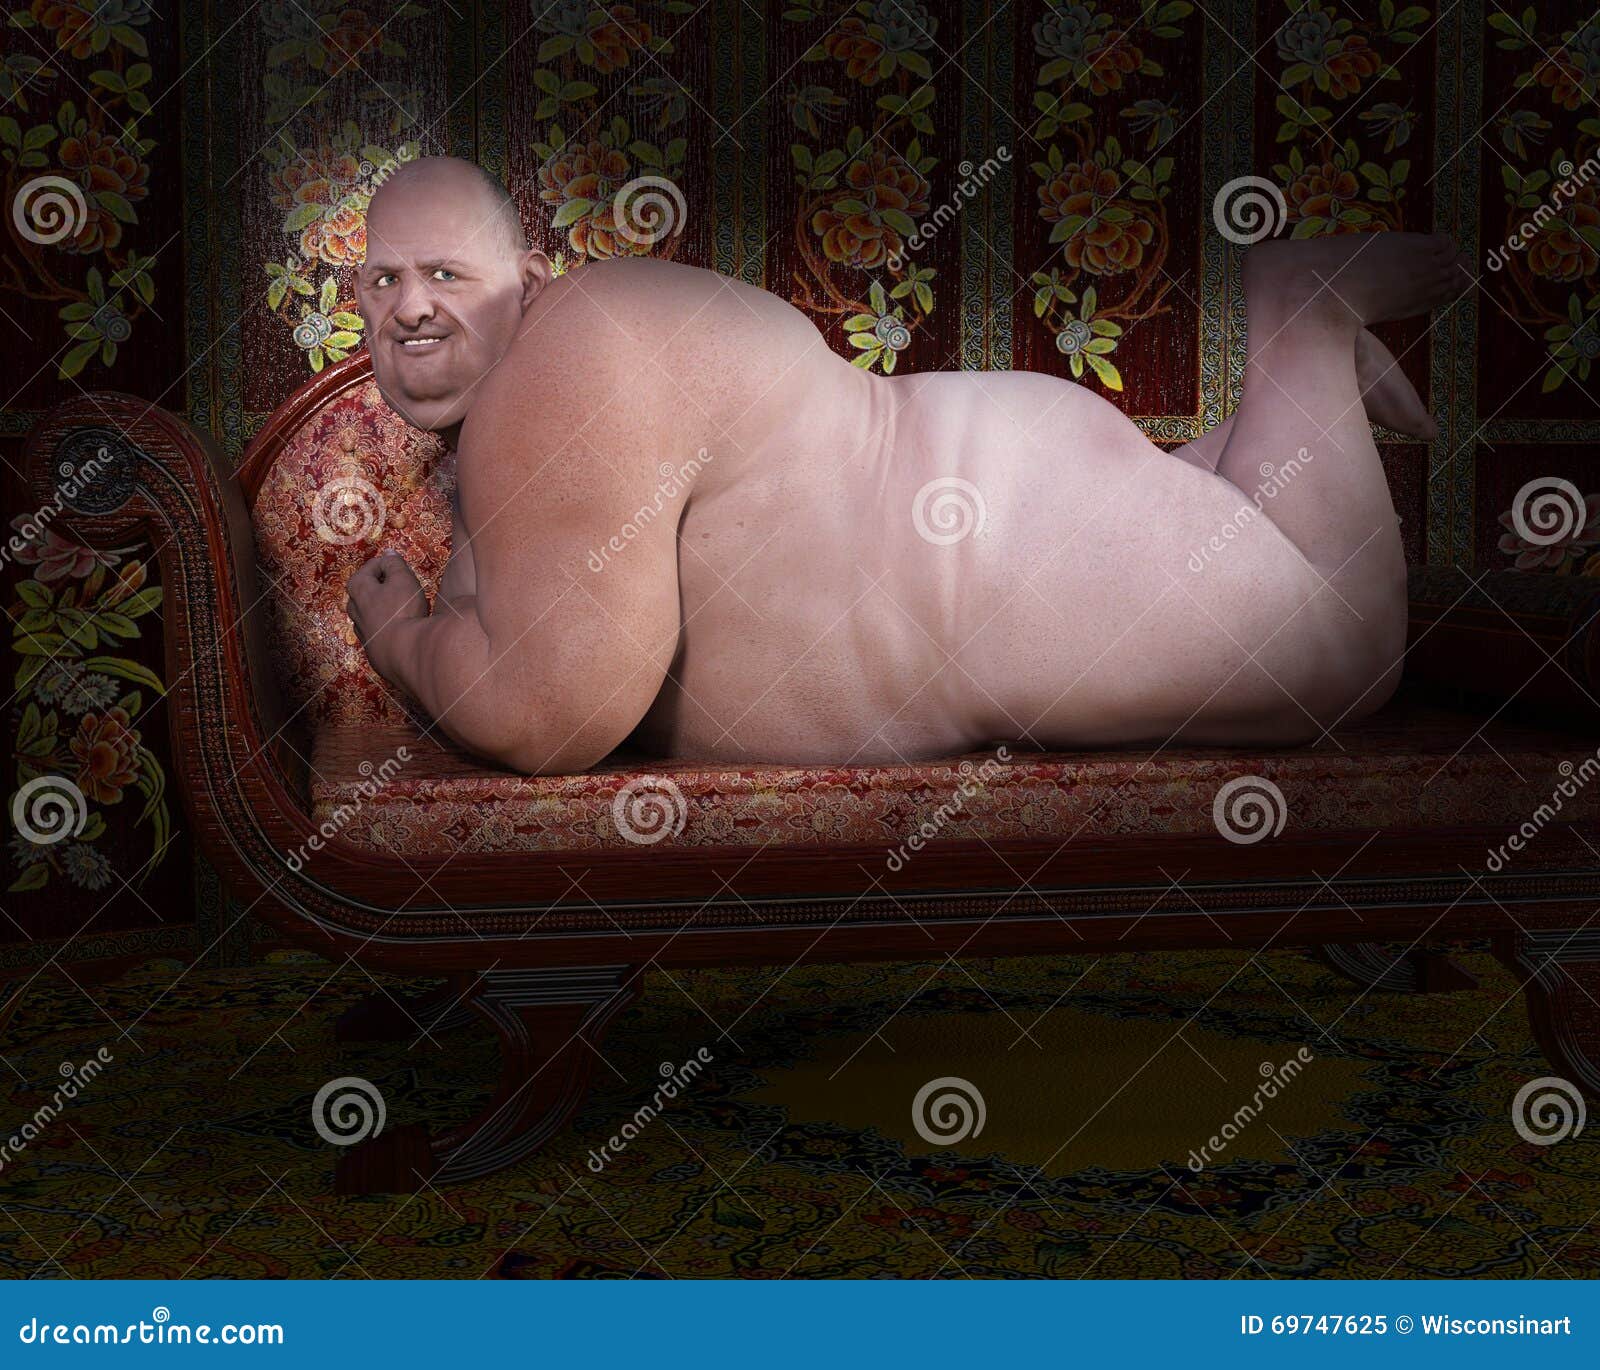 Funny Obese Nude Male Illustration Stock Image - Image of artistic,  obesity: 69747625